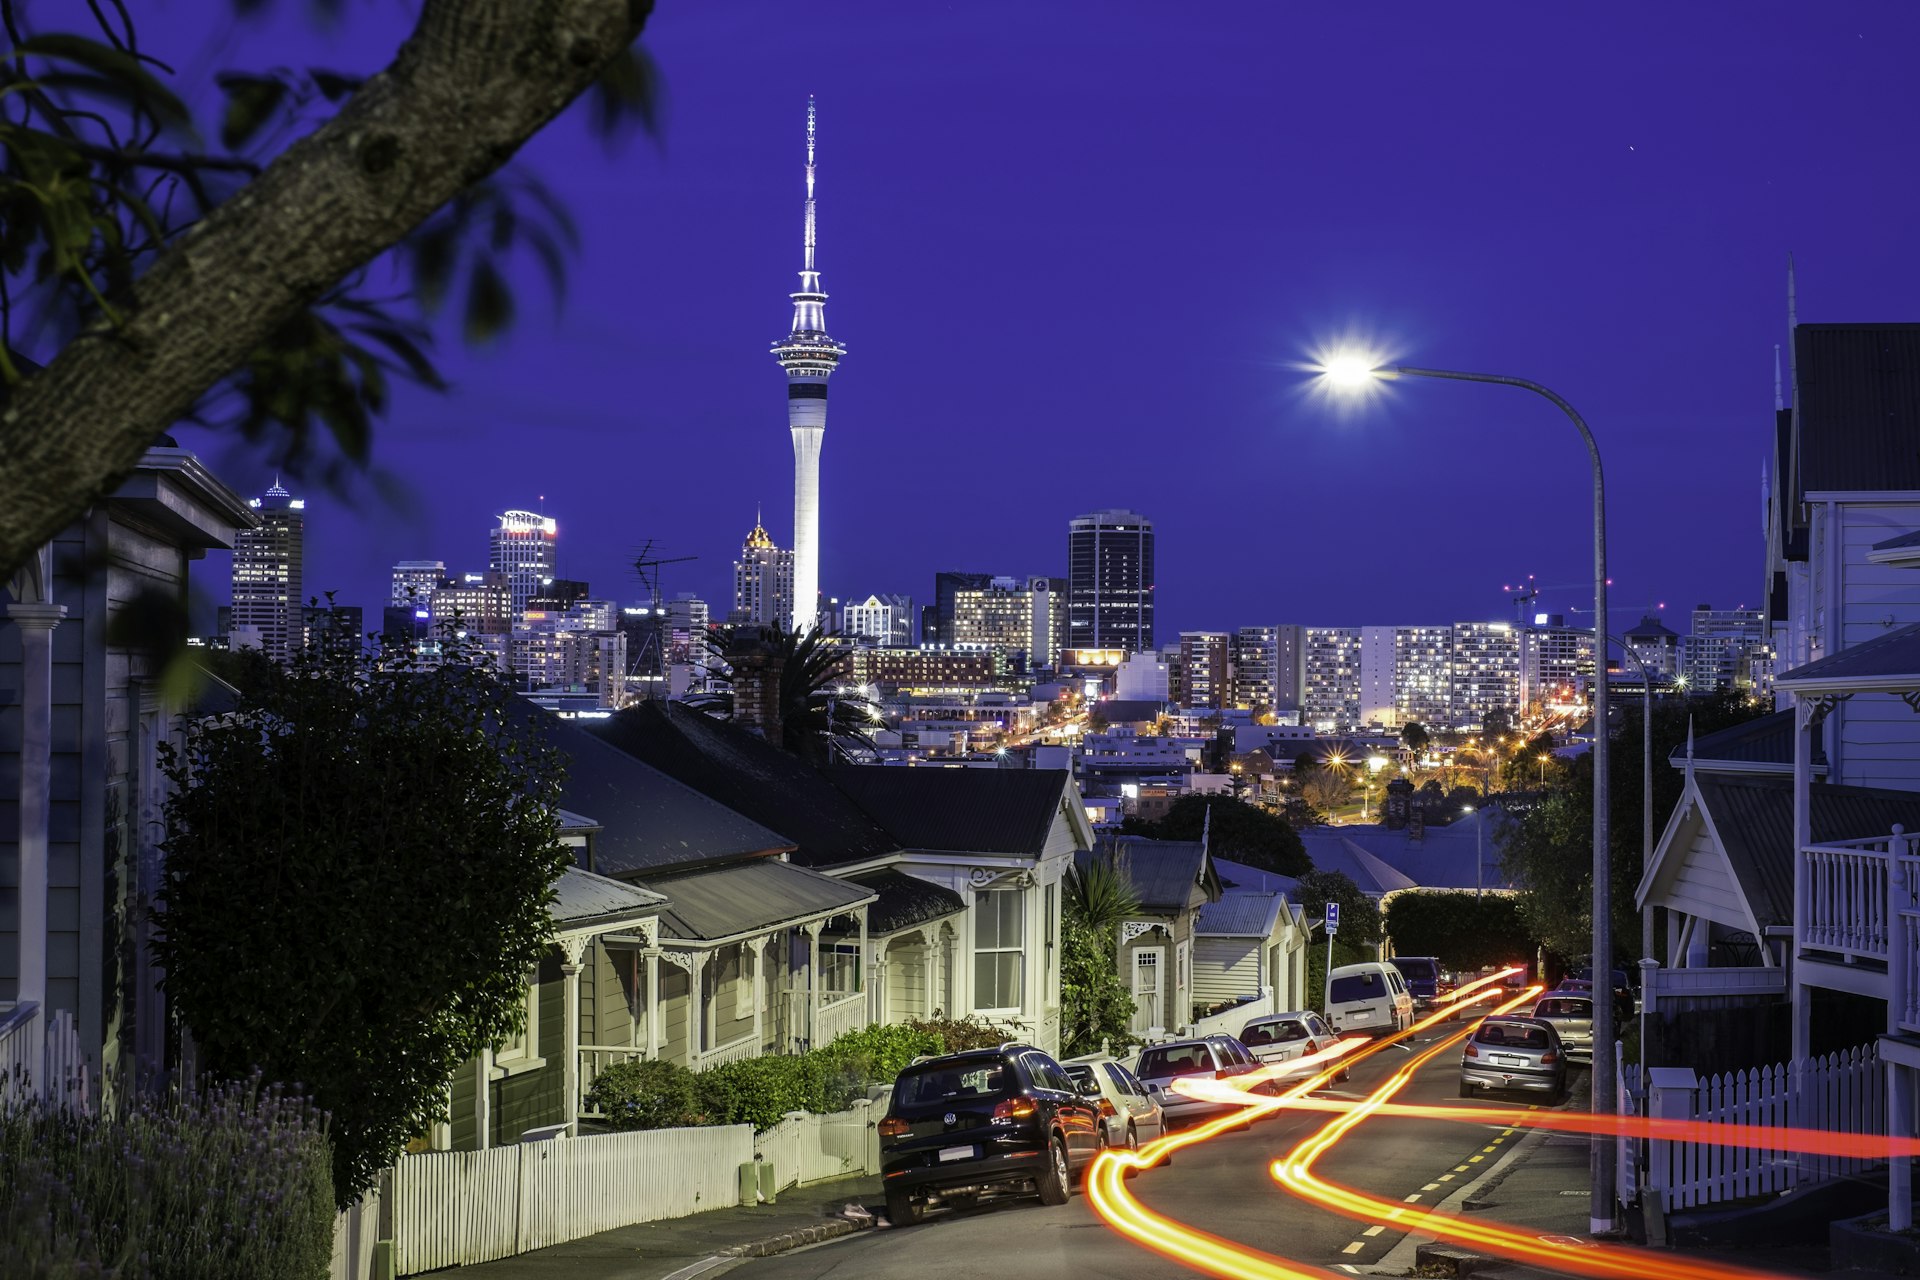 A night scene in Ponsonby, with the Sky Tower on the skyline